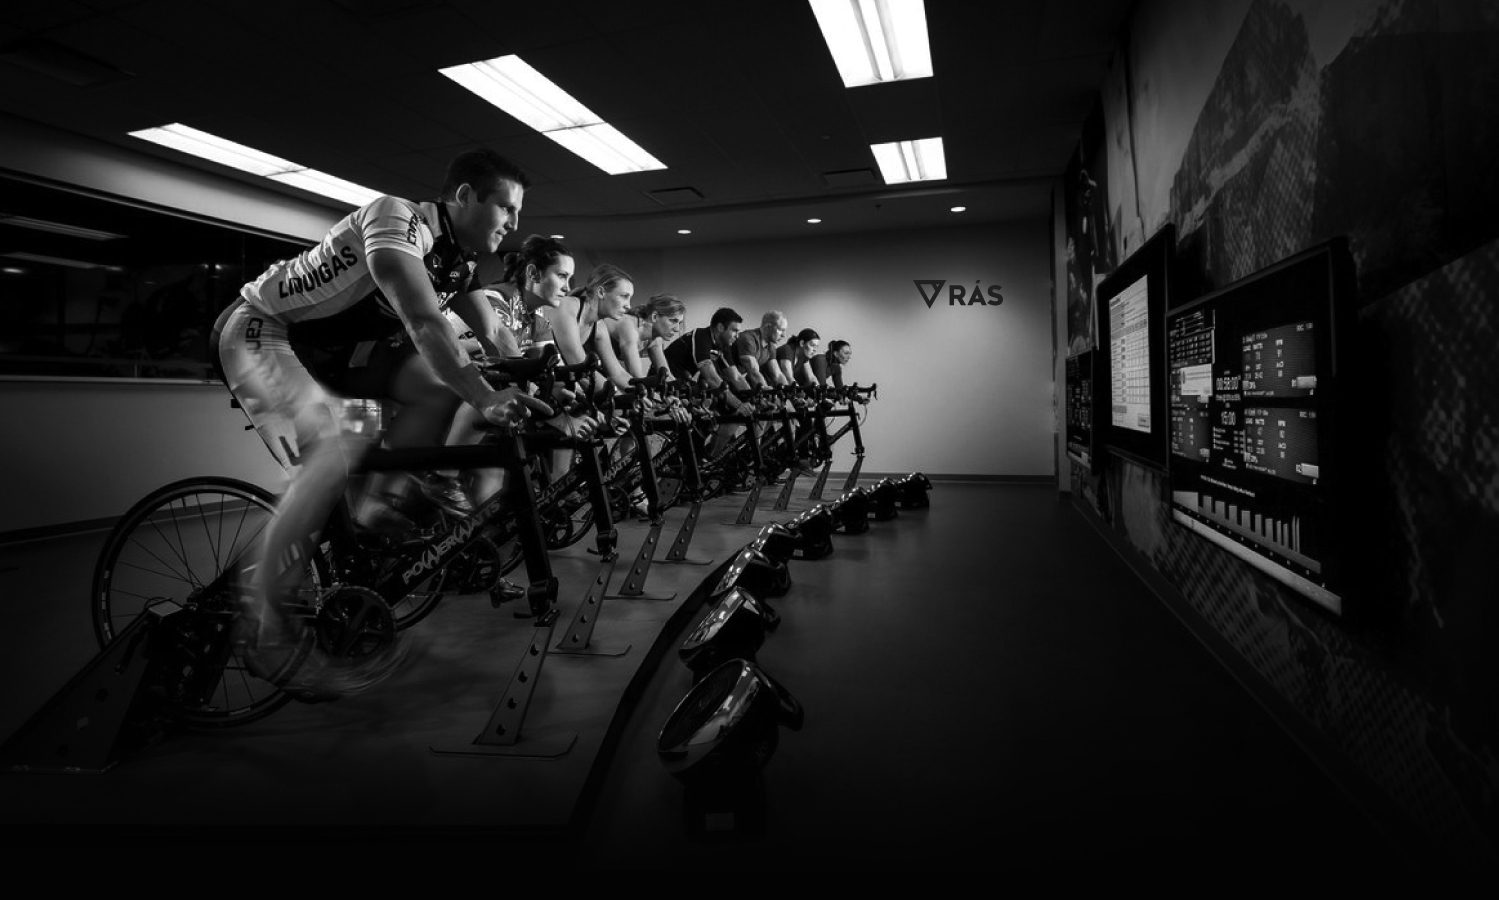 A group of cyclists training indoors on stationary bikes in a dimly lit room, focused intently on their workout, with a monitor displaying brand design performance metrics on the right.